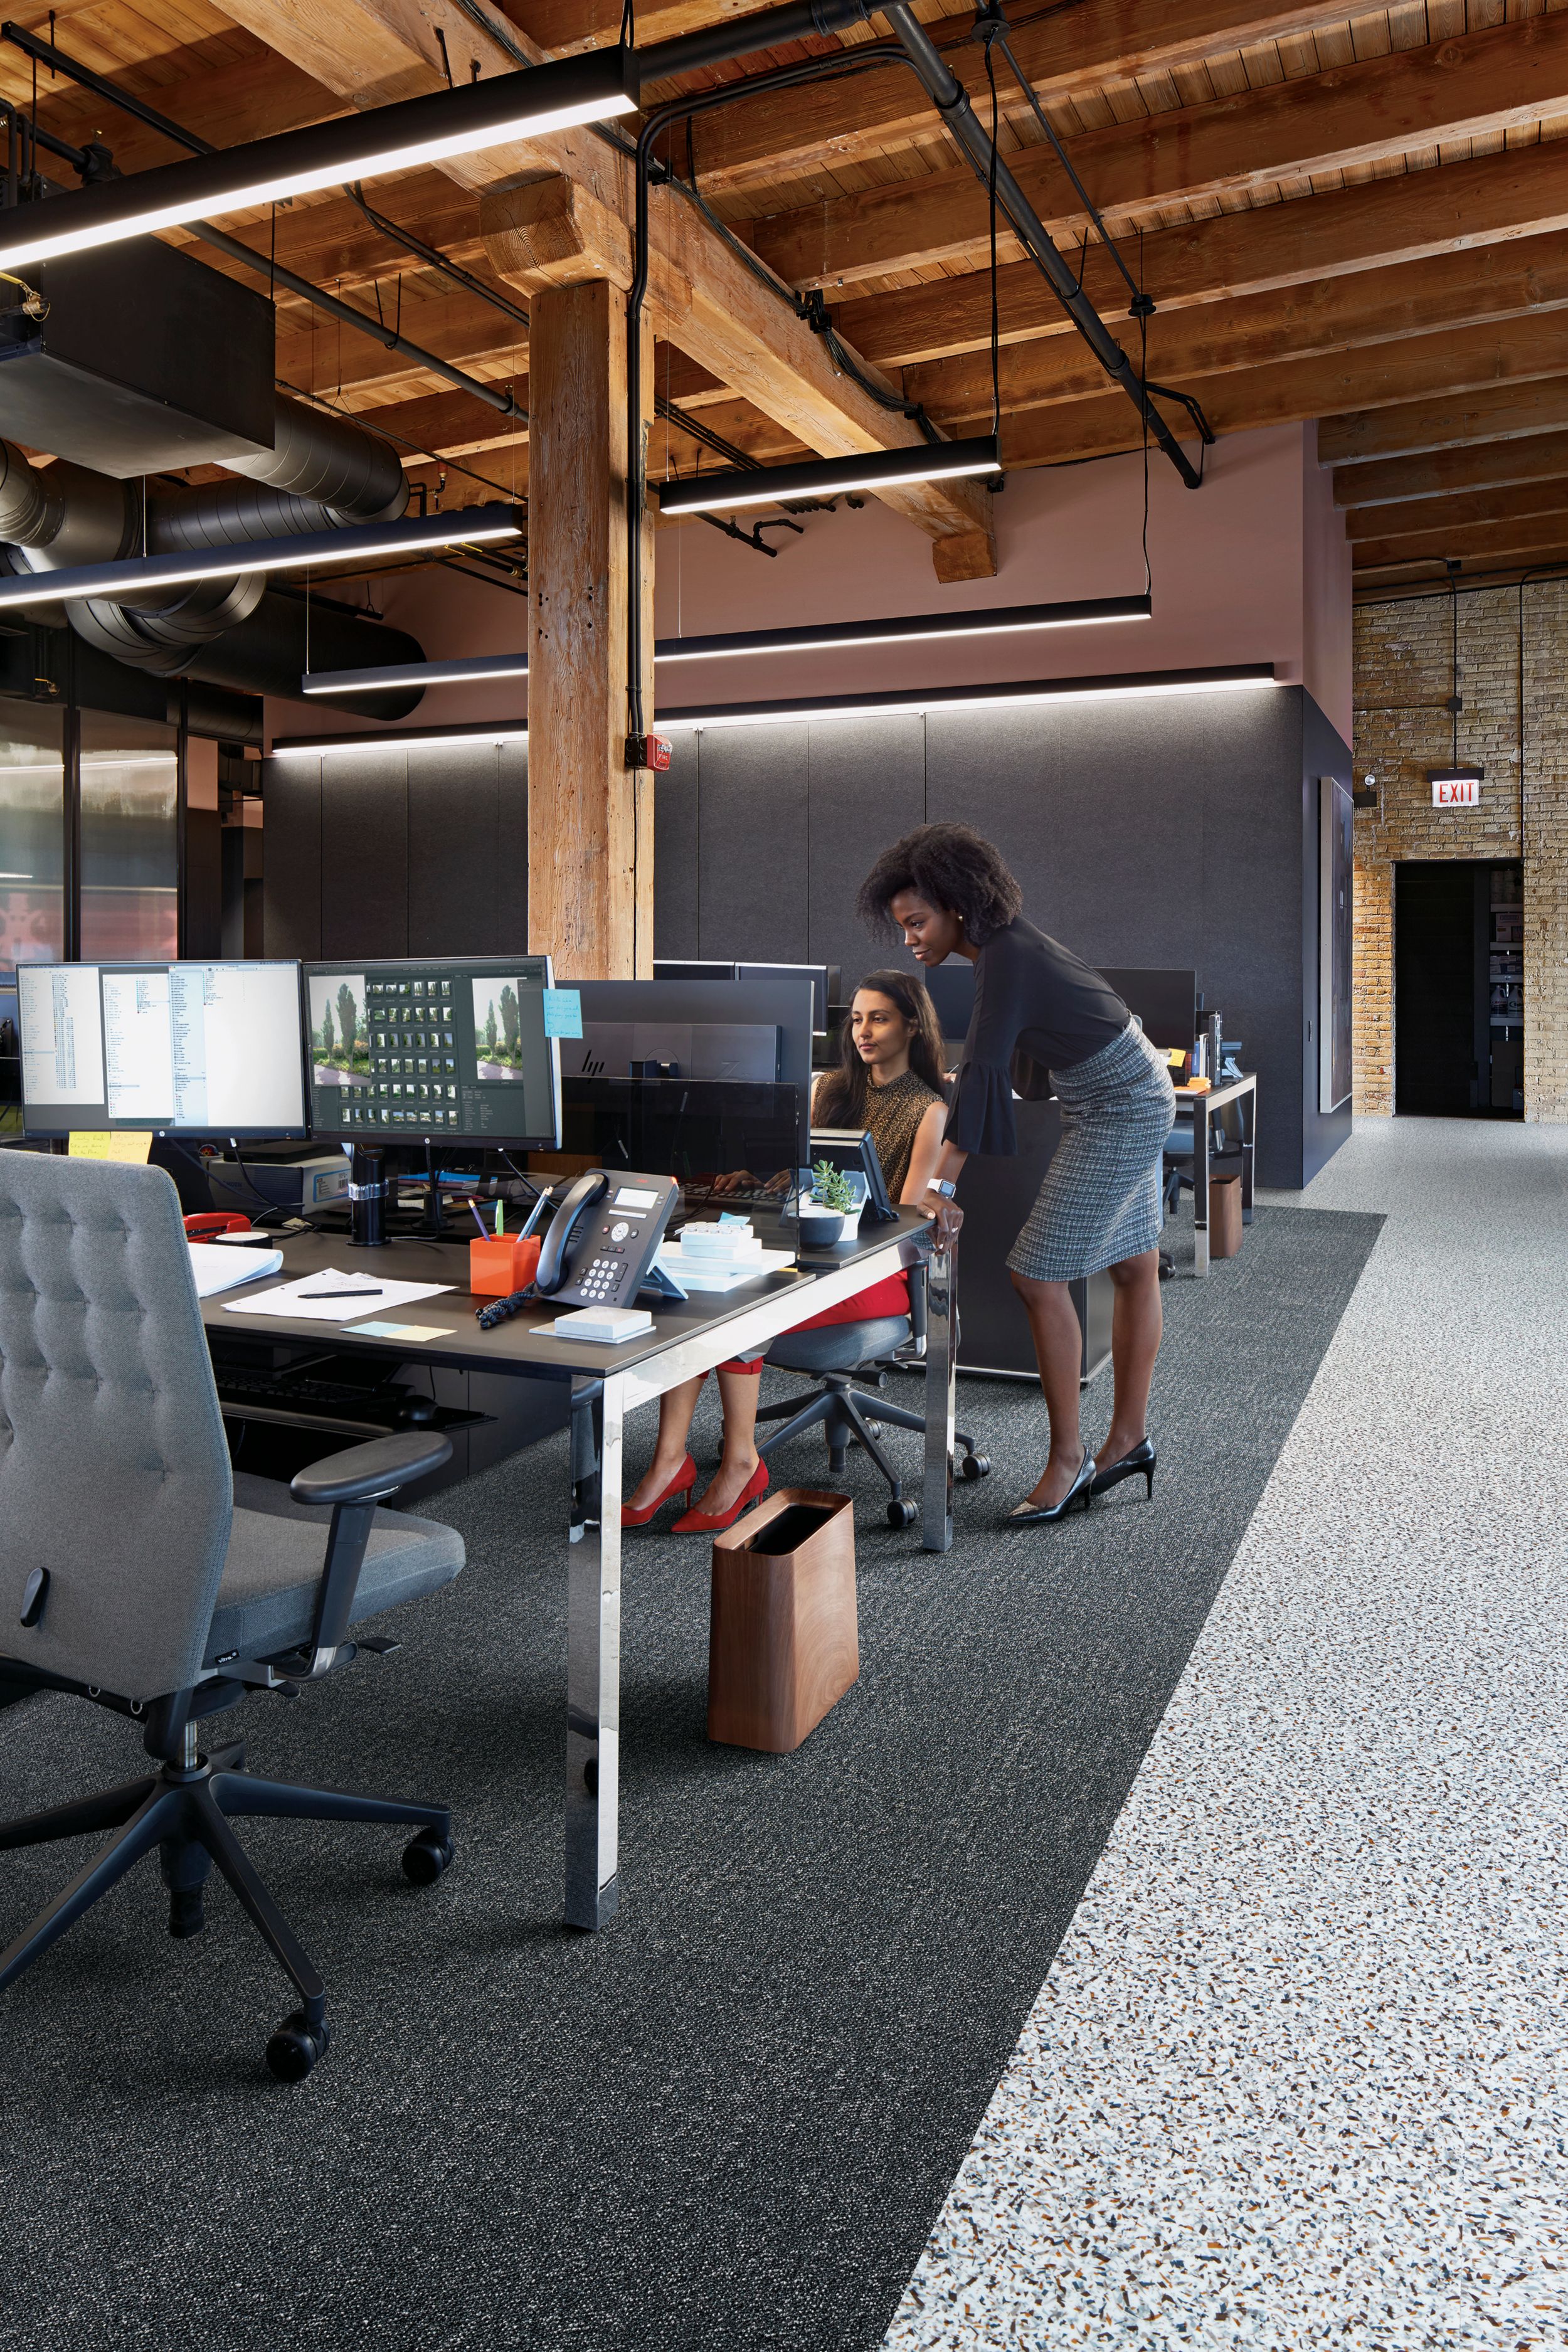 Interface Step it Up and Walk on By carpet tile in common work space with two people Bildnummer 4